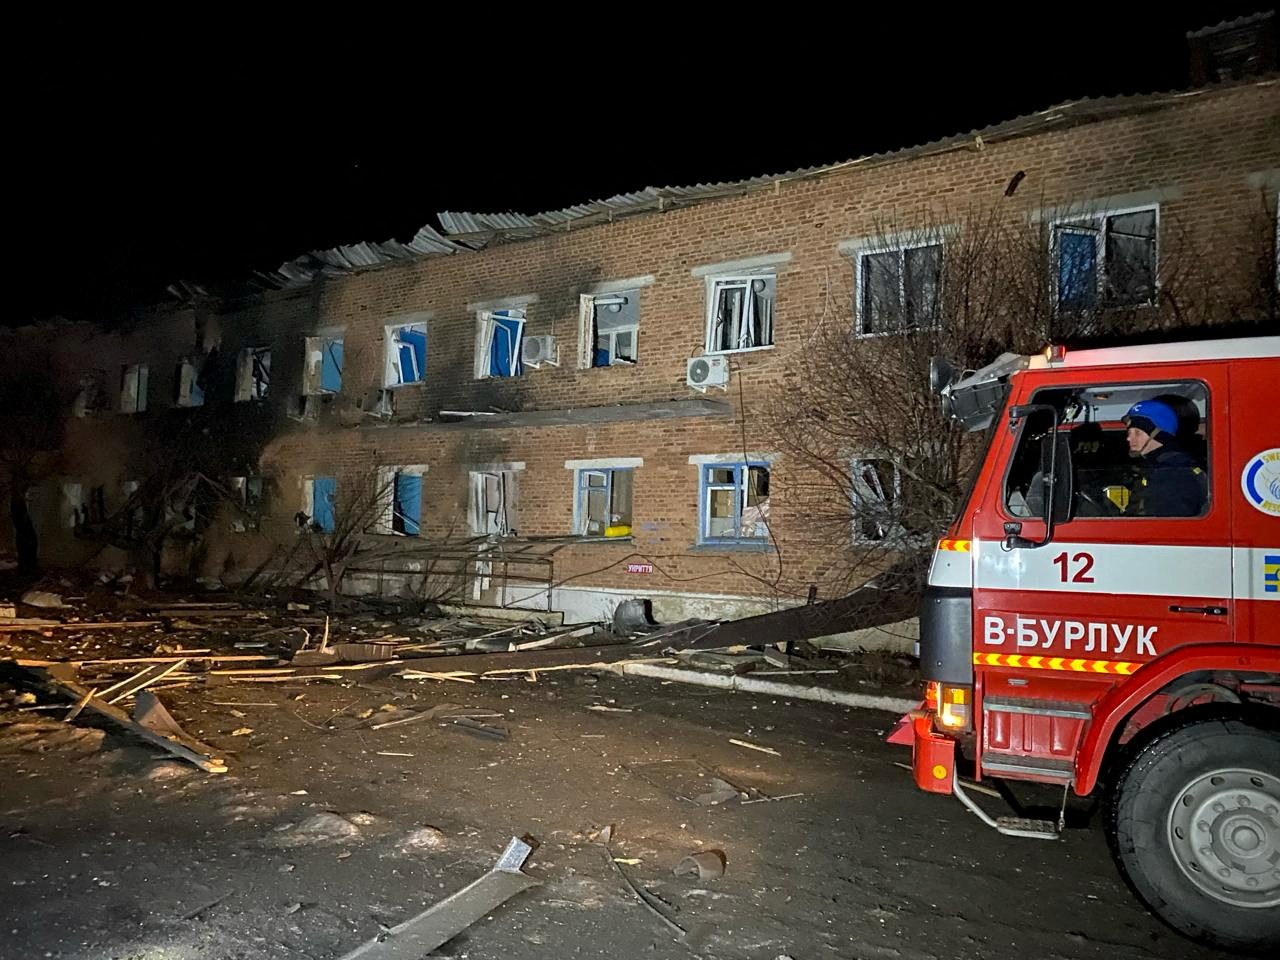 Russian bomb damages hospital, prompts evacuation in northeastern Ukraine – officials